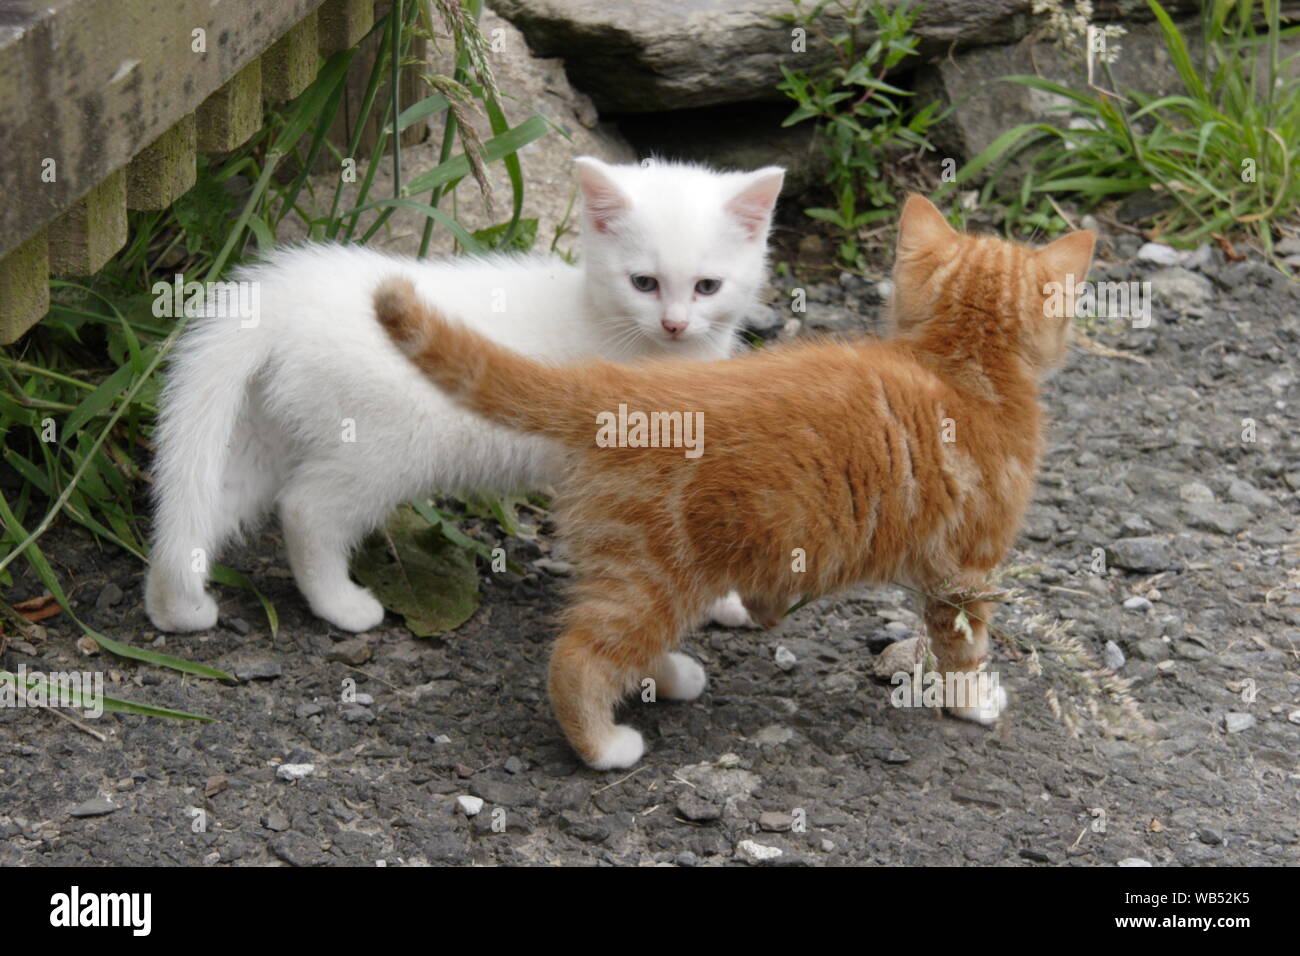 Tom Cats High Resolution Stock Photography and Images - Alamy